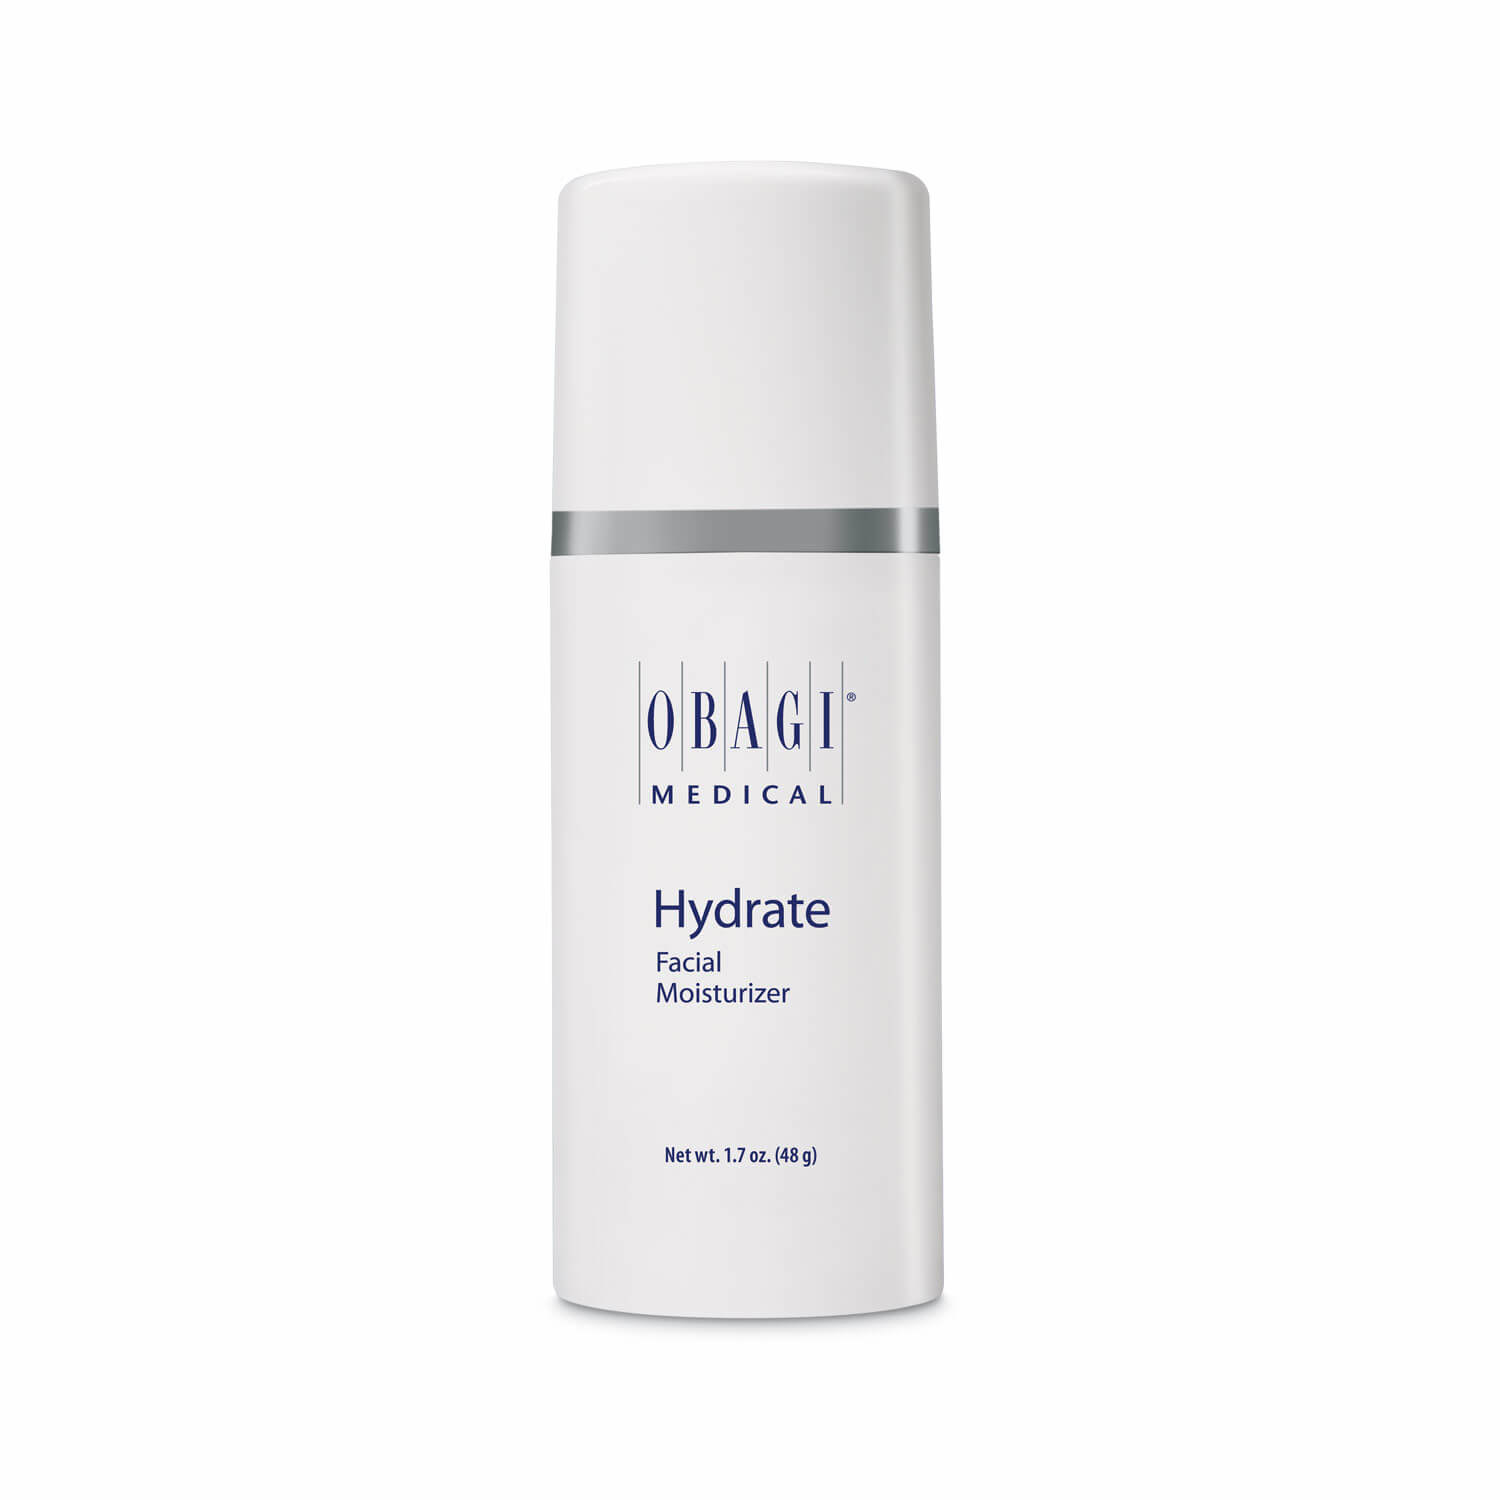 The Hydrate Facial Moisturizer bottle has 1.7 oz of product.